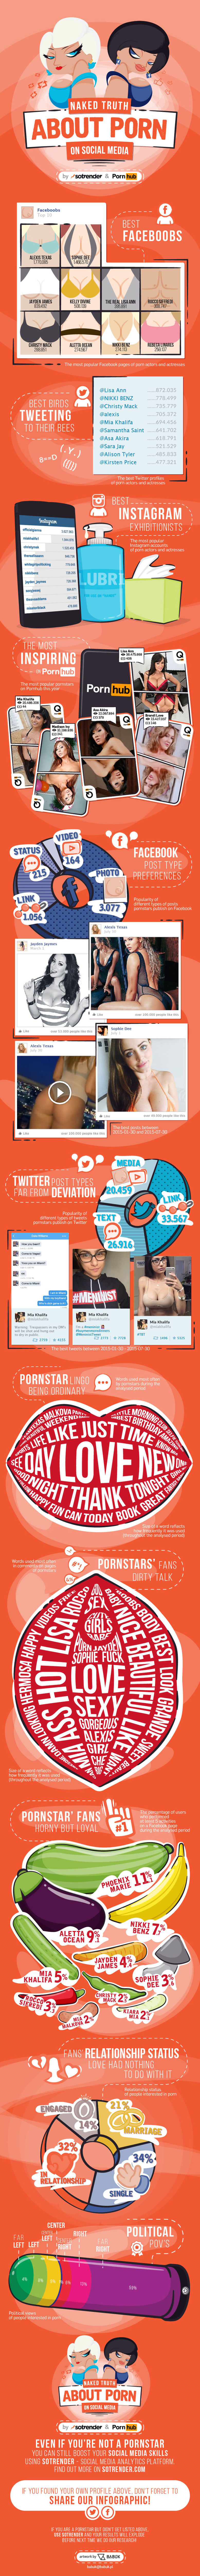 Infographic About The Success Of Pornstars On Facebook, Twitter, And Instagram